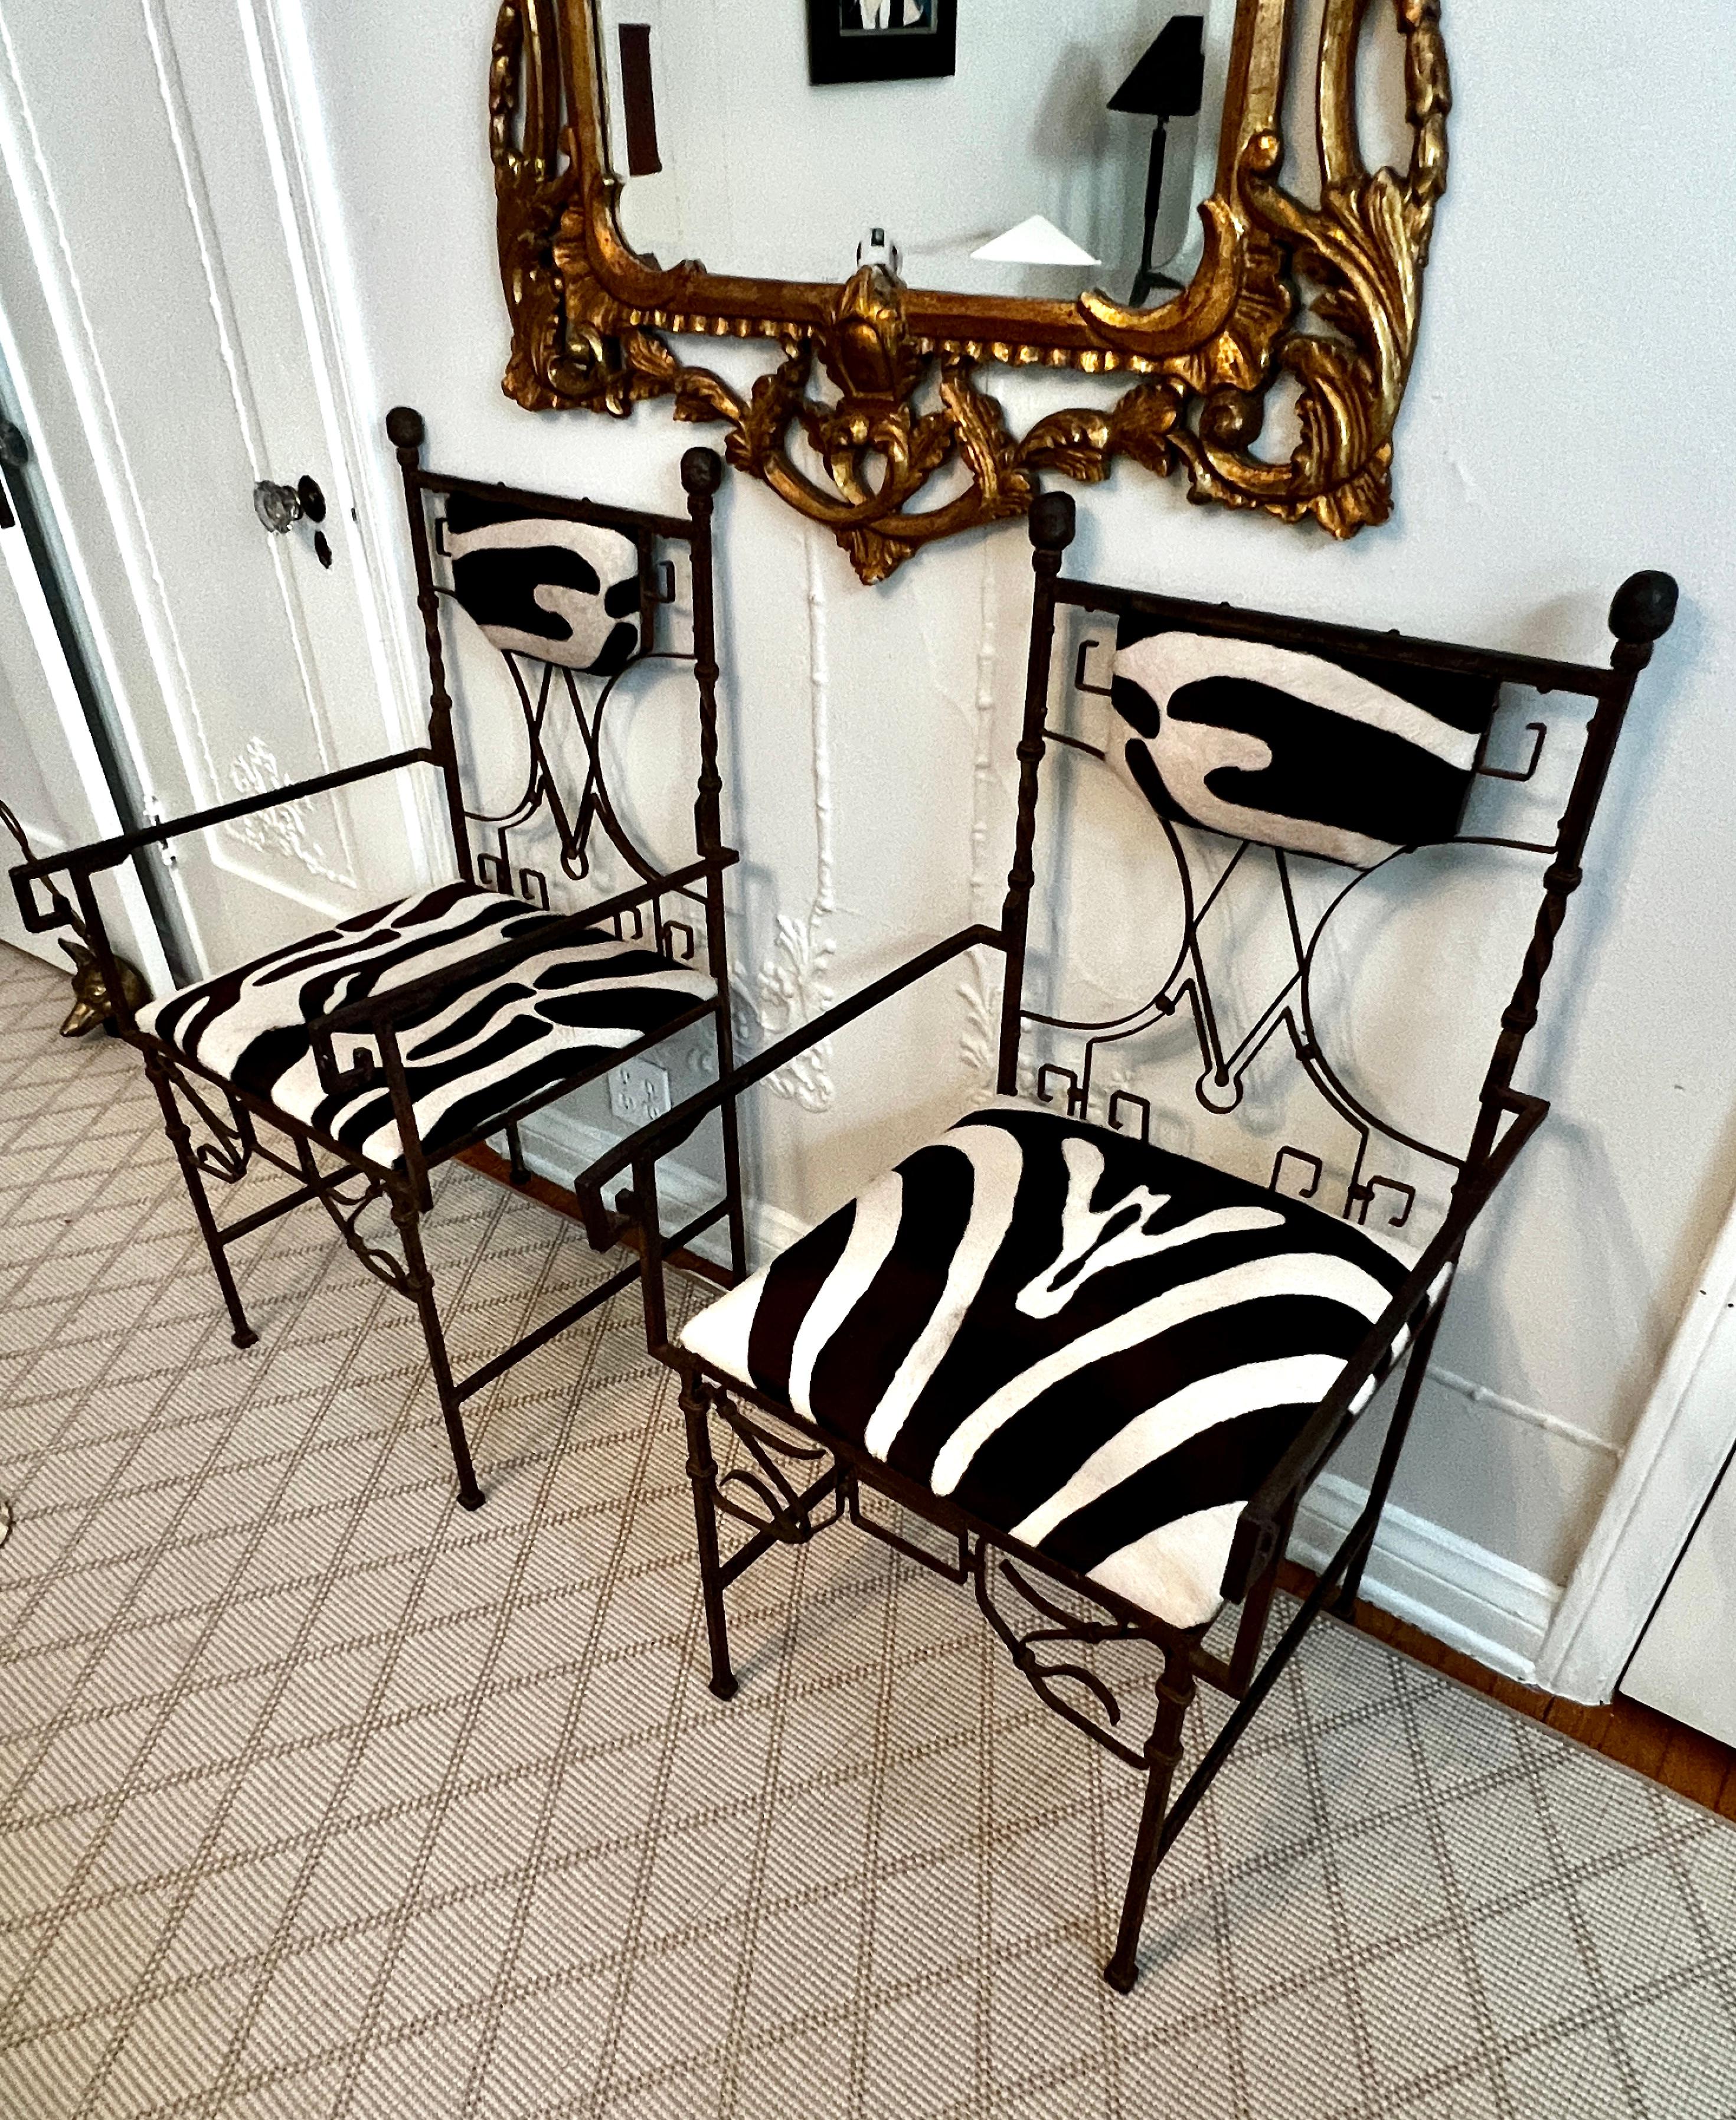 Pair of Wrought Iron French Art Deco Chairs with Zebra Print For Sale 3